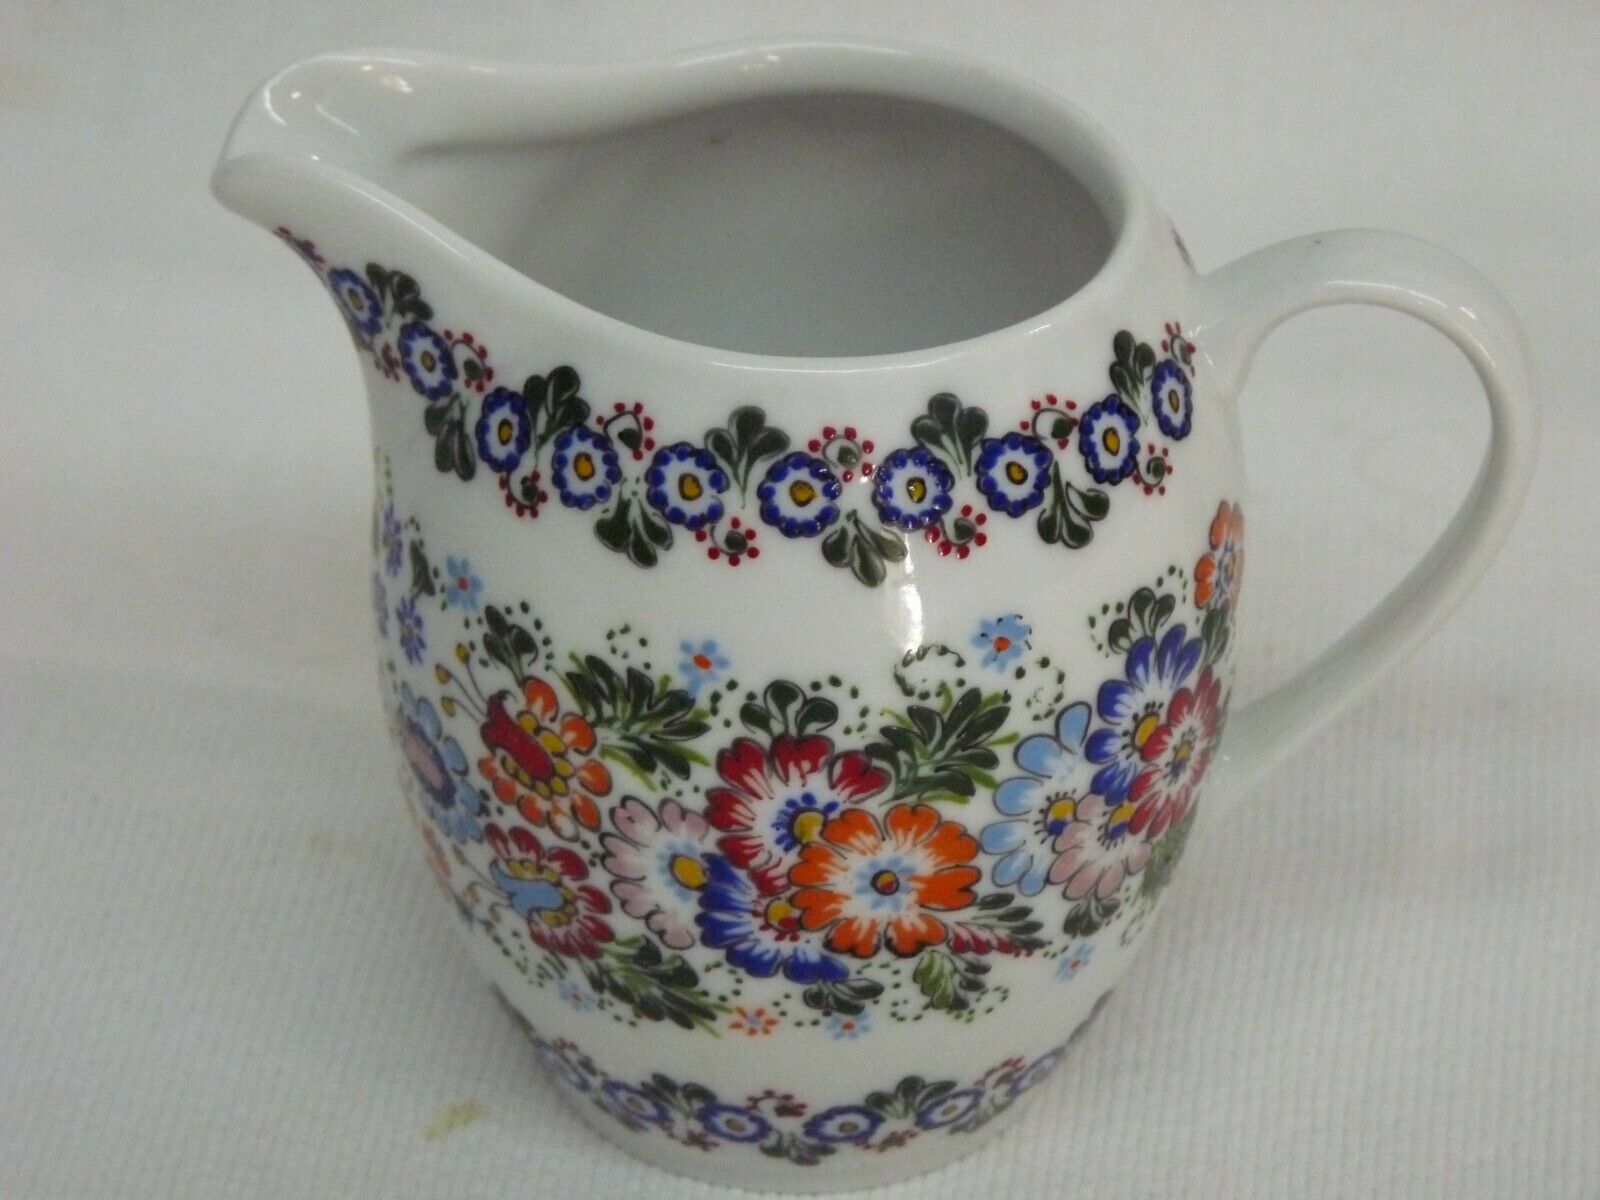 Polish Pottery Cepelia Opoiska 4 in Pitcher Hand Painted Signed